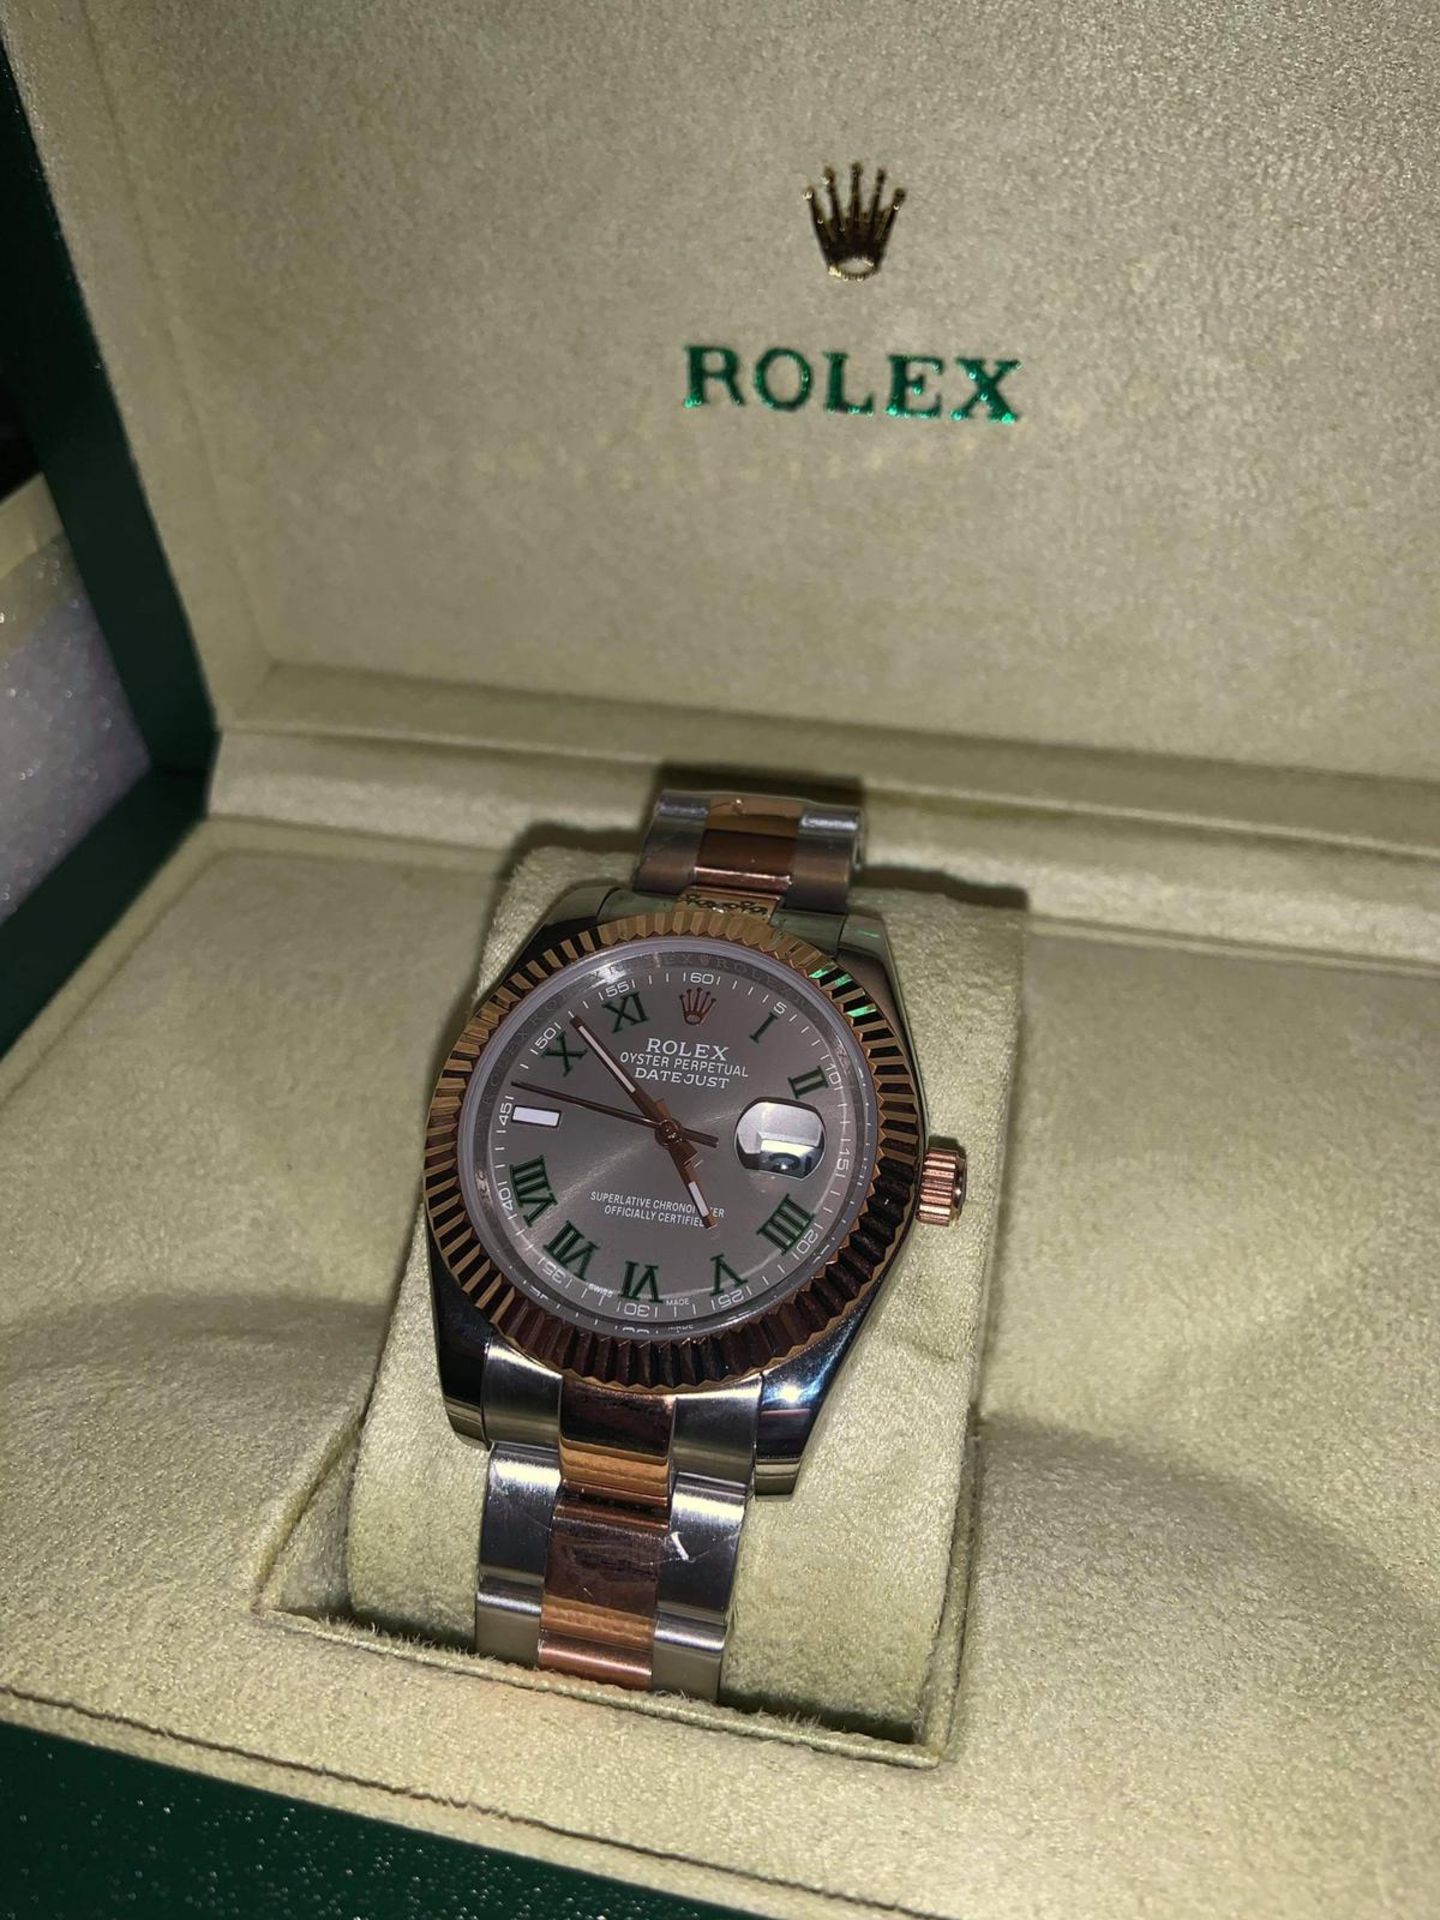 REPLICA ROLEX OYSTER PERPETUAL DATEJUST, BRAND NEW BOXED AND UNWORN *NO VAT*